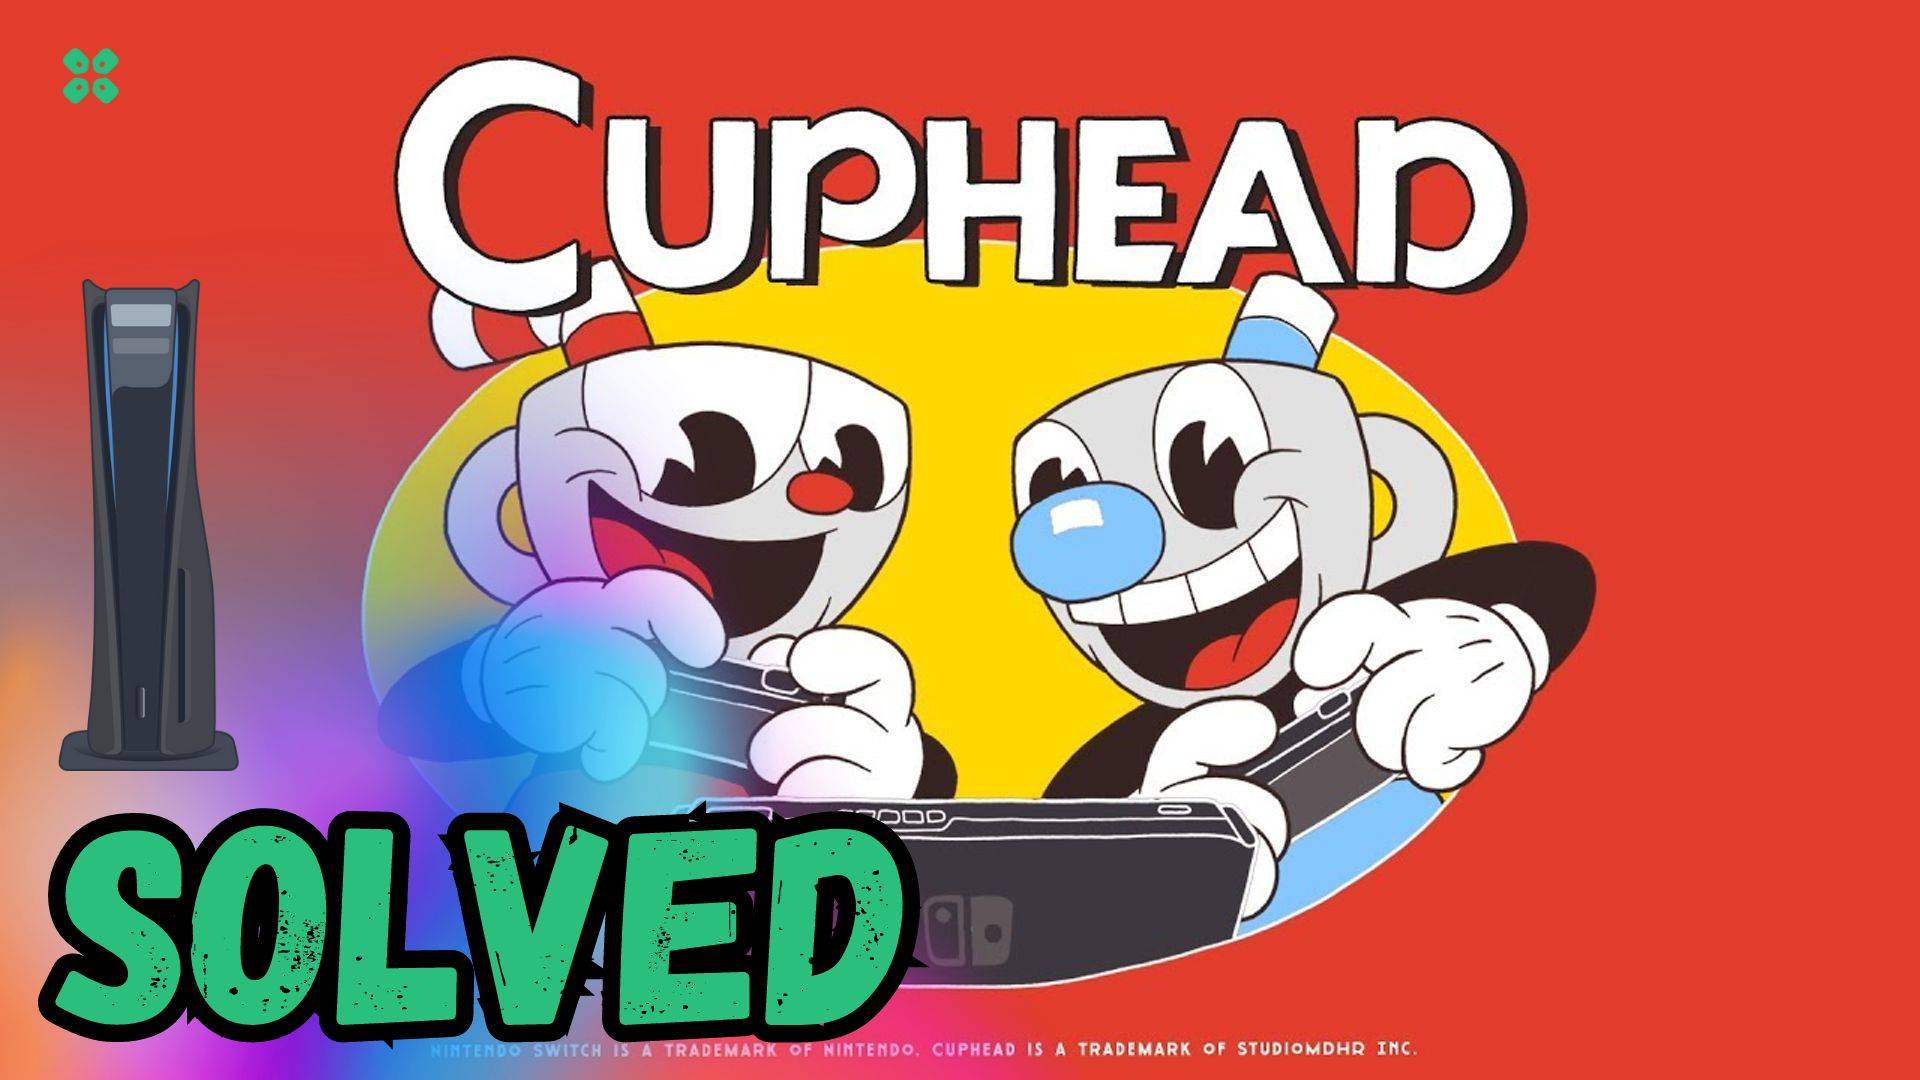 Artwork of Cuphead and its fix of crashing by TCG